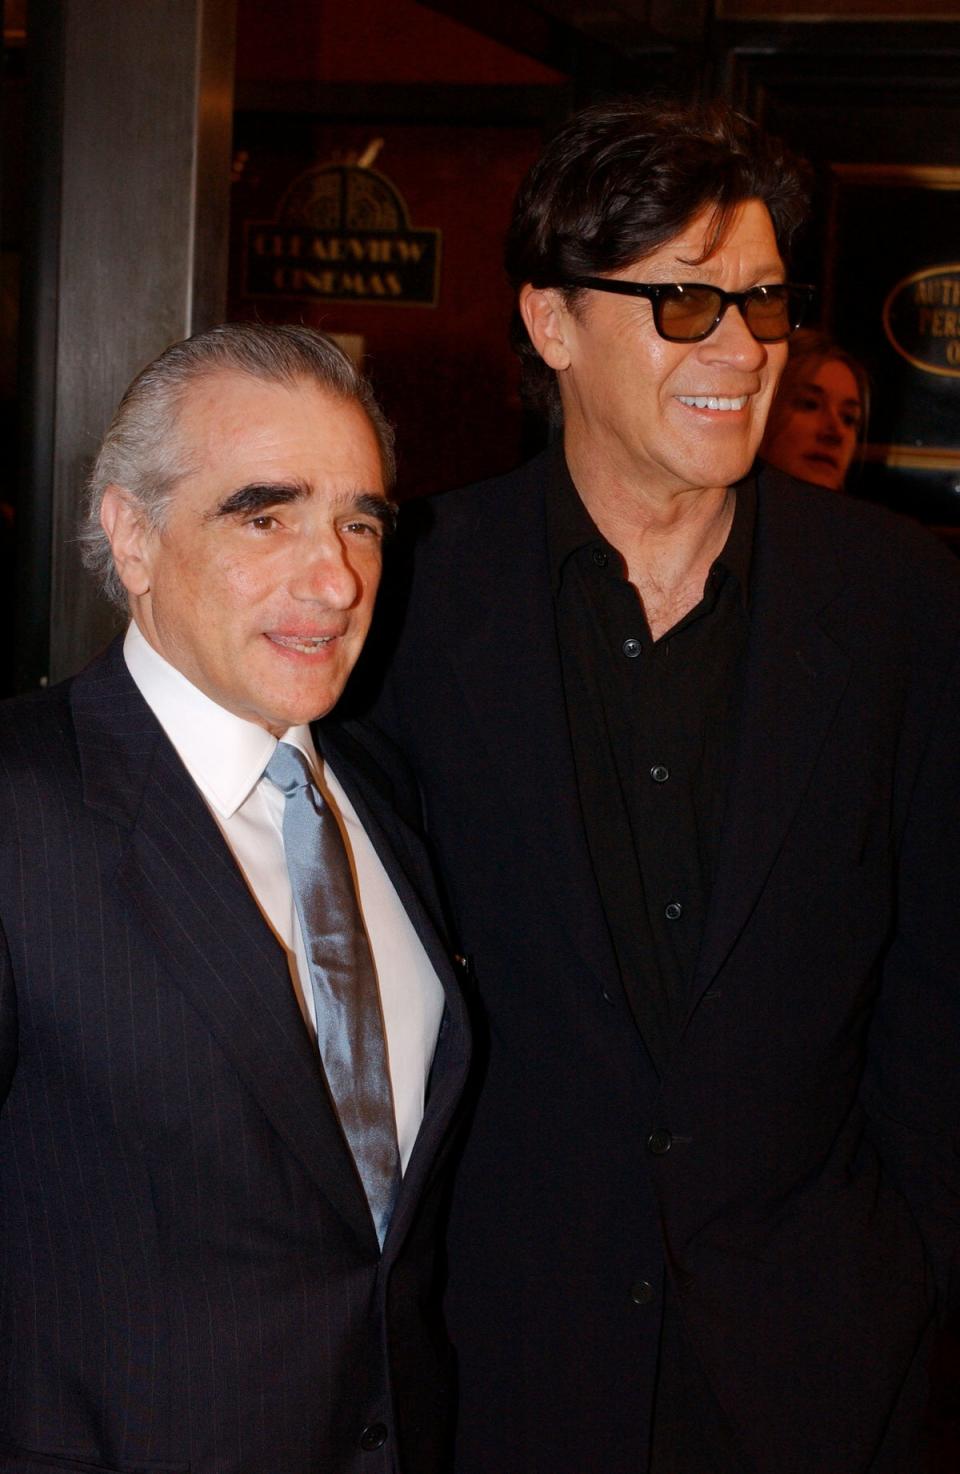 Scorsese pictured with Robertson in 2002 (Getty Images)